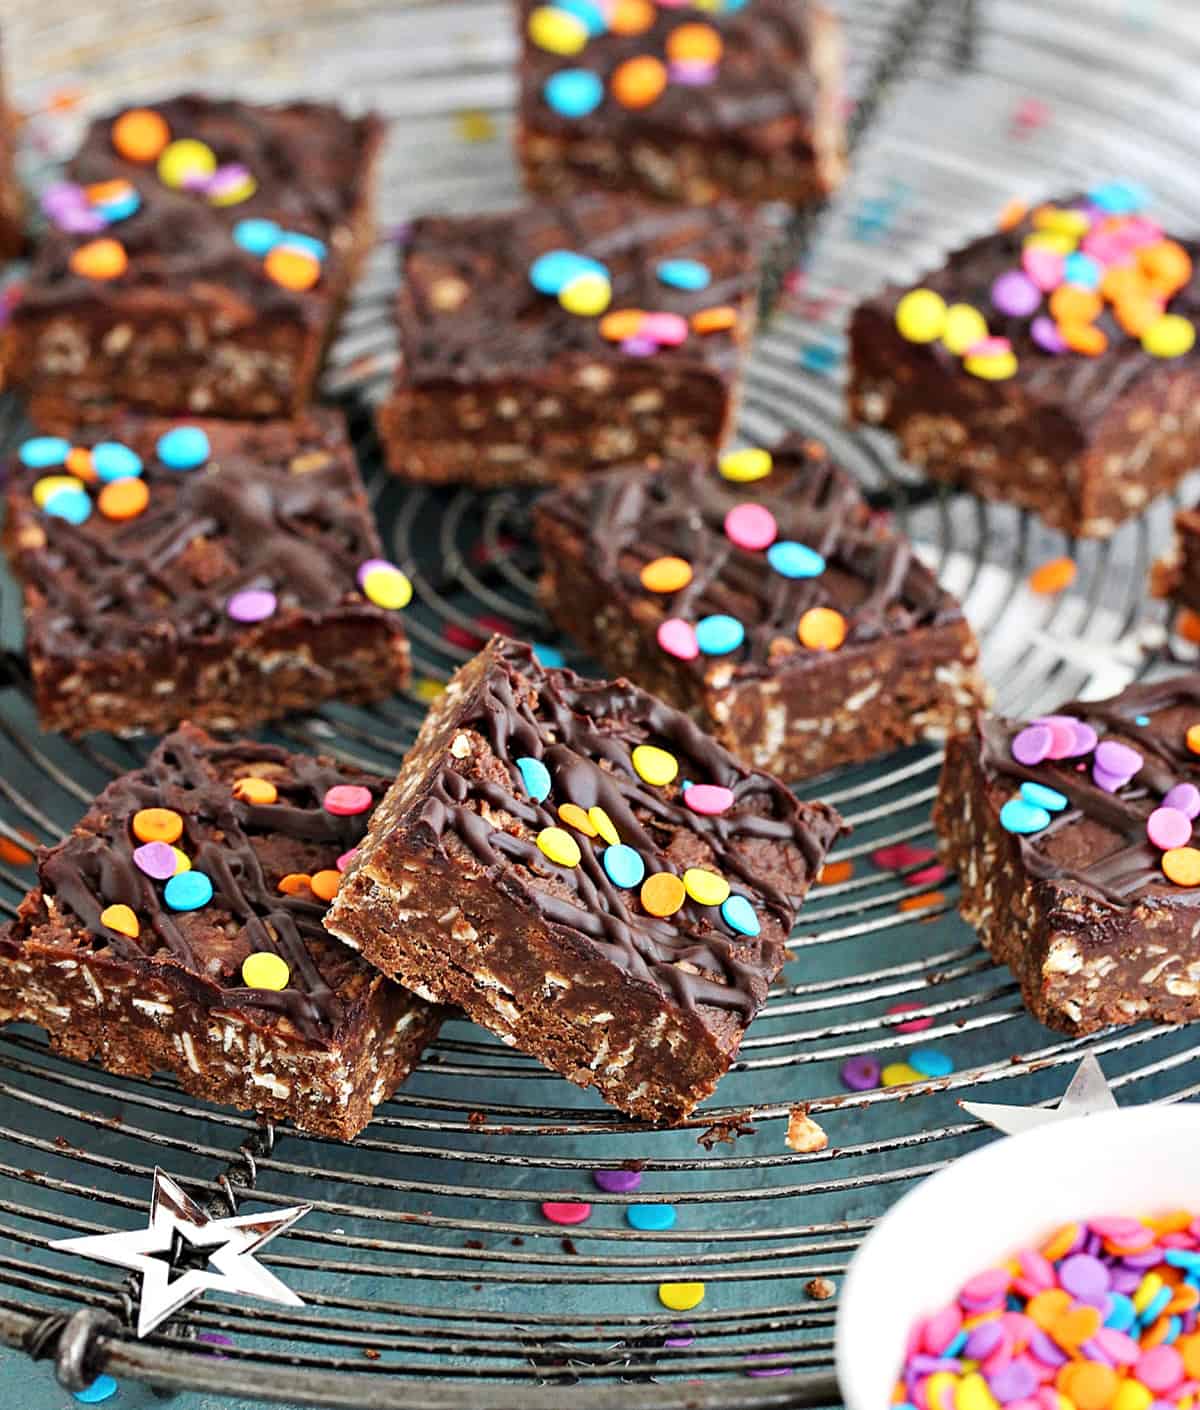 Chocolate oat squares on a wire rack with confetti, bluish background.